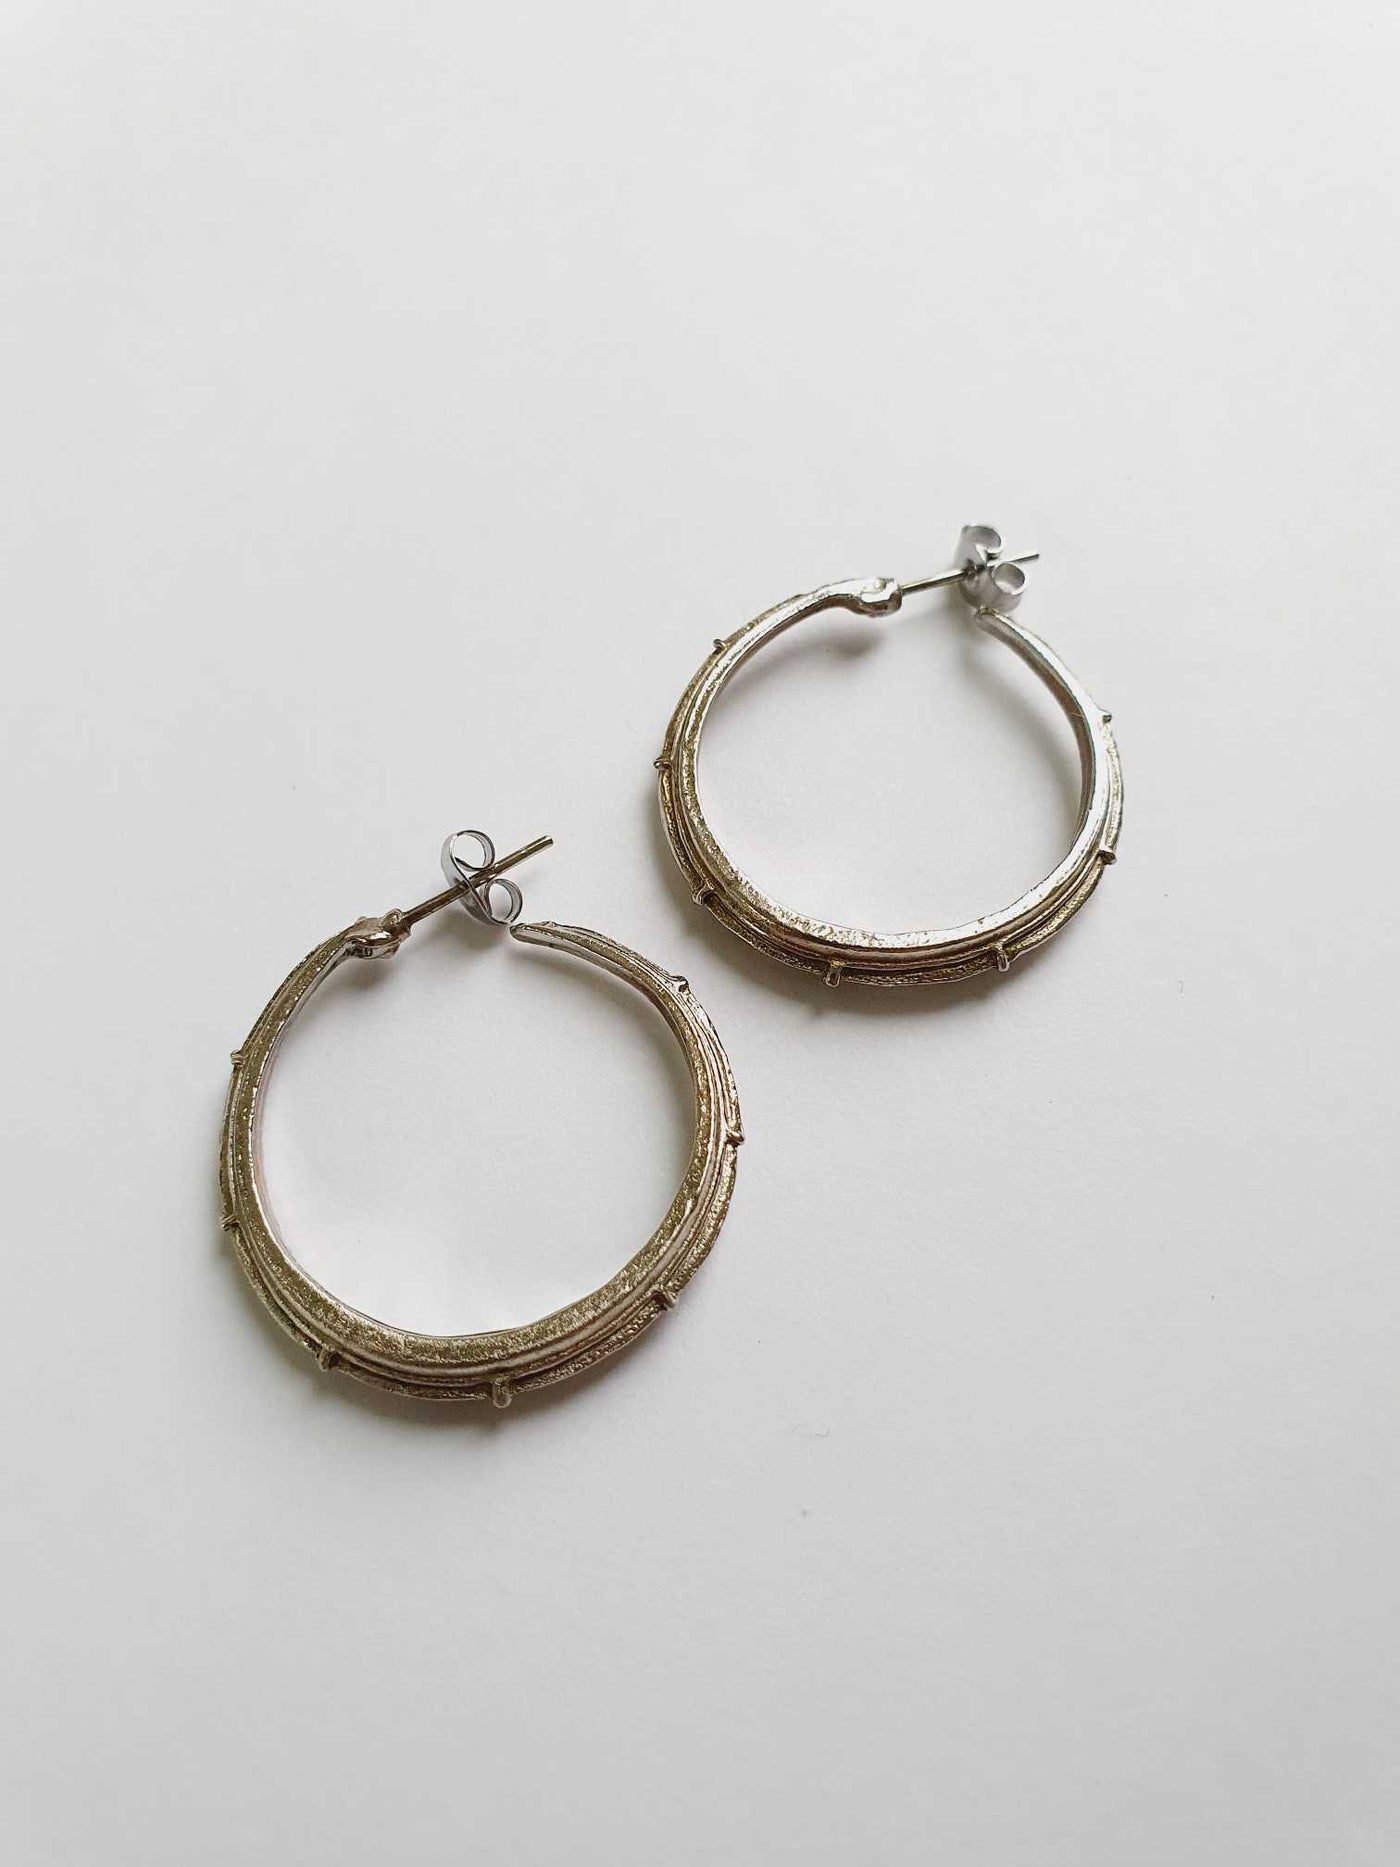 Vintage Silver Toned Textured Hoops